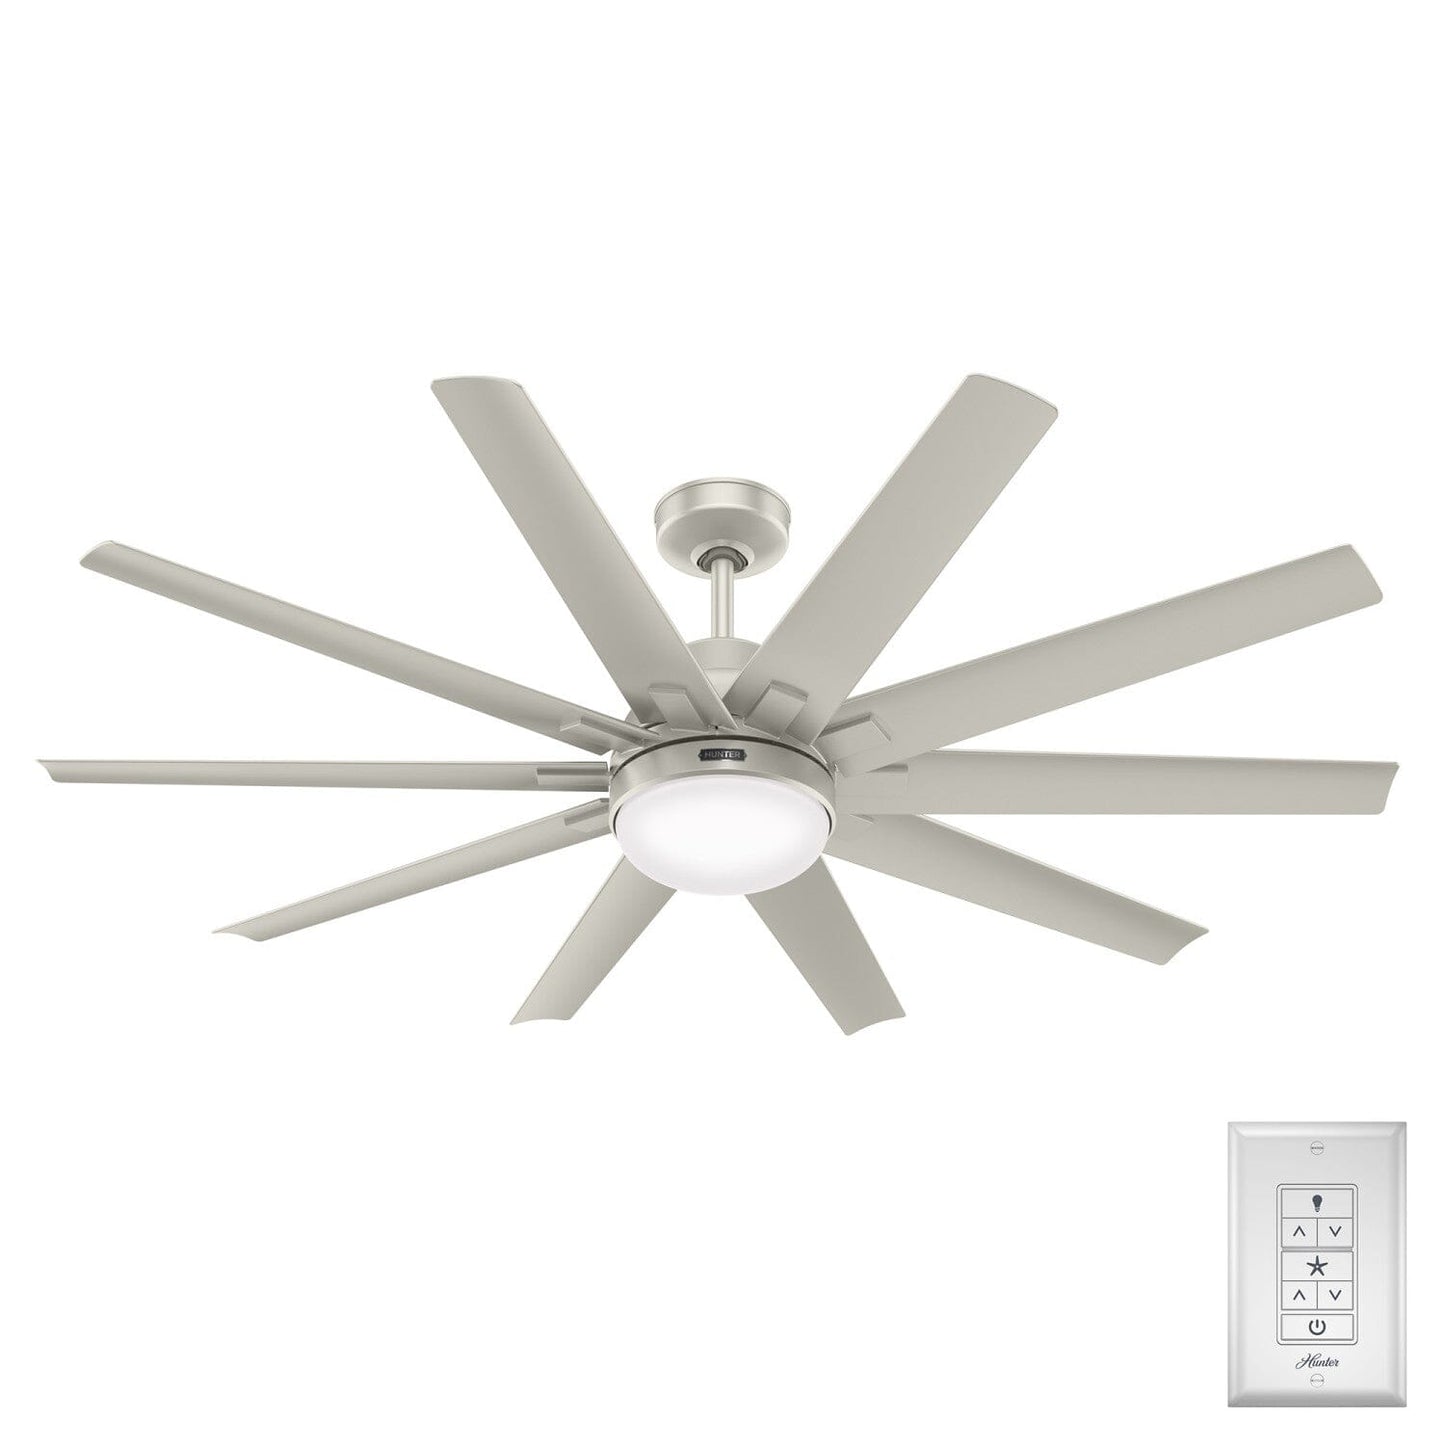 Overton Outdoor ENERGY STAR with LED Light 60 inch Ceiling Fans Hunter Matte Nickel - Matte Nickel 